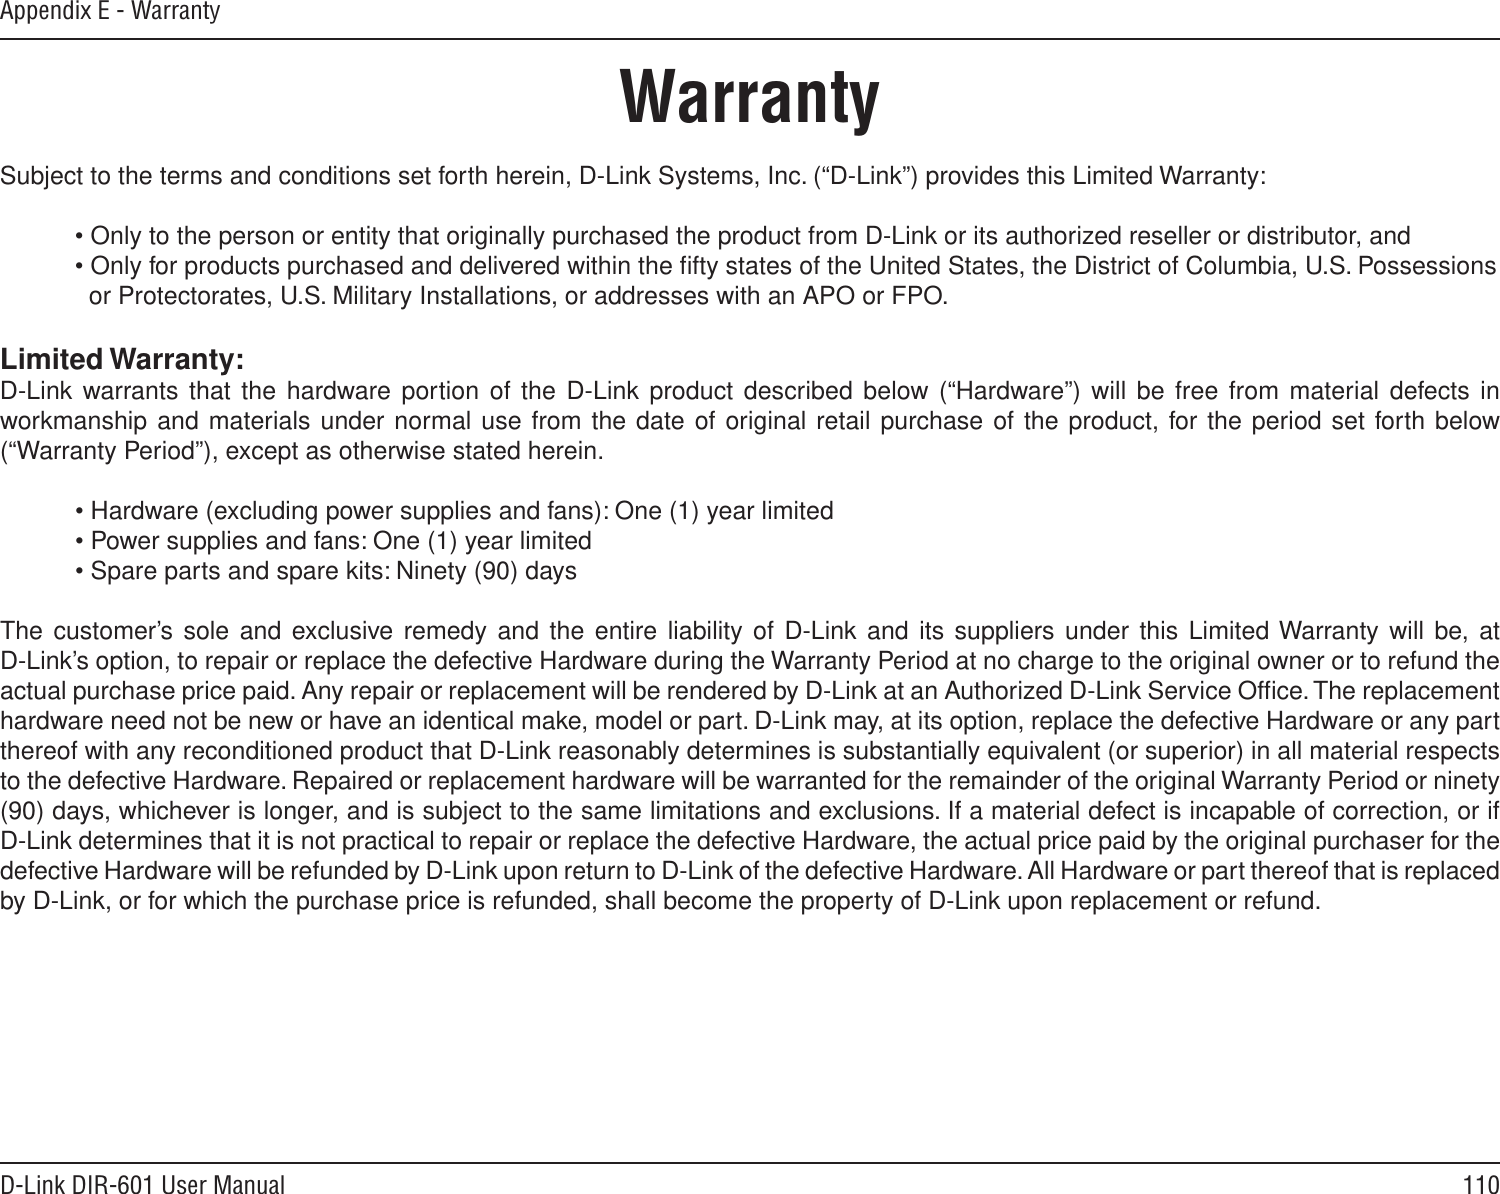 110D-Link DIR-601 User ManualAppendix E - WarrantyWarrantySubject to the terms and conditions set forth herein, D-Link Systems, Inc. (“D-Link”) provides this Limited Warranty:  • Only to the person or entity that originally purchased the product from D-Link or its authorized reseller or distributor, and  • Only for products purchased and delivered within the ﬁfty states of the United States, the District of Columbia, U.S. Possessions      or Protectorates, U.S. Military Installations, or addresses with an APO or FPO.Limited Warranty:D-Link warrants that the  hardware portion of the D-Link product  described  below (“Hardware”) will be free  from material  defects in workmanship and materials under normal use from the date of original retail purchase of the product, for the period set forth below (“Warranty Period”), except as otherwise stated herein.  • Hardware (excluding power supplies and fans): One (1) year limited  • Power supplies and fans: One (1) year limited  • Spare parts and spare kits: Ninety (90) daysThe customer’s sole and  exclusive remedy and the  entire liability of D-Link  and its suppliers under this  Limited Warranty will be, at  D-Link’s option, to repair or replace the defective Hardware during the Warranty Period at no charge to the original owner or to refund the actual purchase price paid. Any repair or replacement will be rendered by D-Link at an Authorized D-Link Service Ofﬁce. The replacement hardware need not be new or have an identical make, model or part. D-Link may, at its option, replace the defective Hardware or any part thereof with any reconditioned product that D-Link reasonably determines is substantially equivalent (or superior) in all material respects to the defective Hardware. Repaired or replacement hardware will be warranted for the remainder of the original Warranty Period or ninety (90) days, whichever is longer, and is subject to the same limitations and exclusions. If a material defect is incapable of correction, or if D-Link determines that it is not practical to repair or replace the defective Hardware, the actual price paid by the original purchaser for the defective Hardware will be refunded by D-Link upon return to D-Link of the defective Hardware. All Hardware or part thereof that is replaced by D-Link, or for which the purchase price is refunded, shall become the property of D-Link upon replacement or refund.